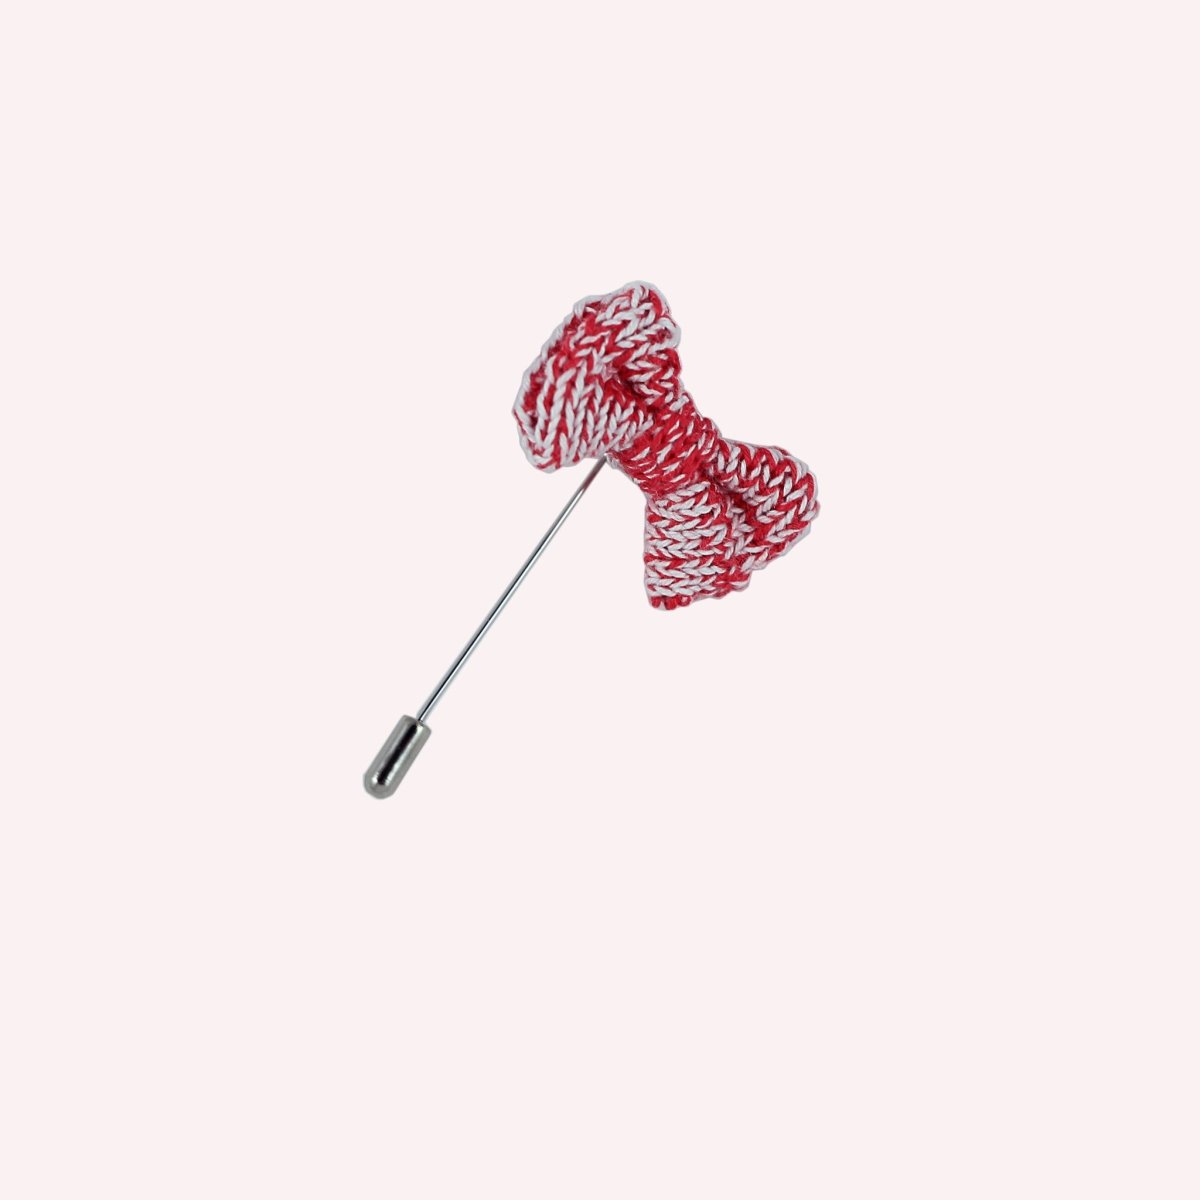 Red / White Bow Tie Pin - Wool & Water